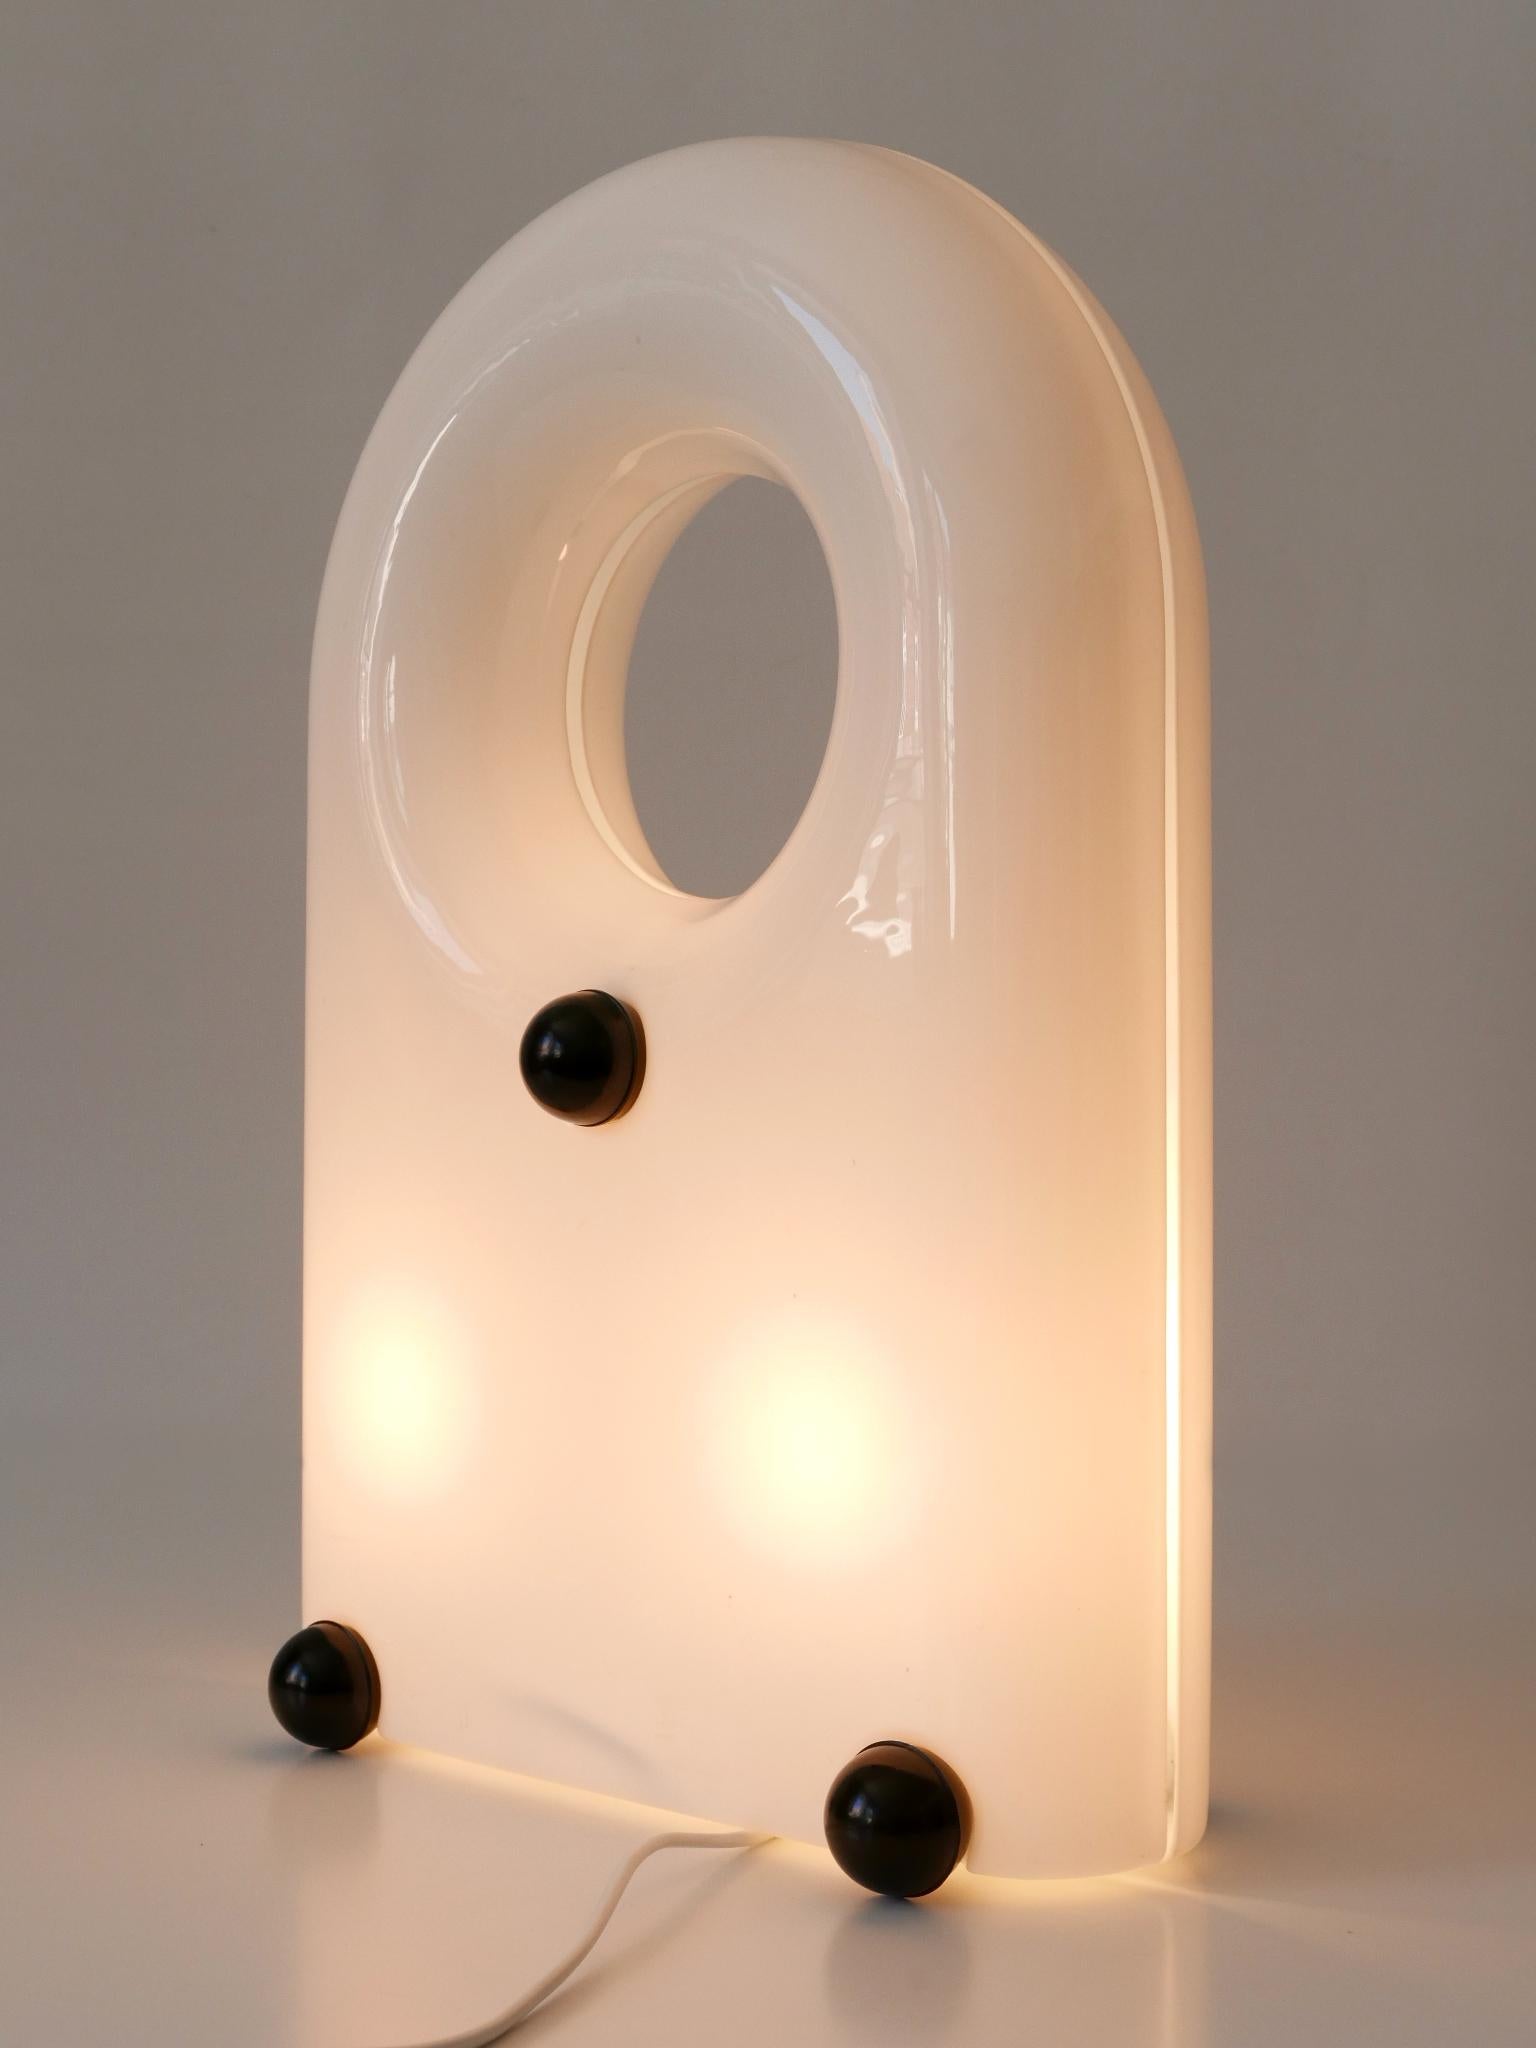 Extremely Rare Lucite Table Lamp or Floor Light by Elio Martinelli 1969 Italy For Sale 8